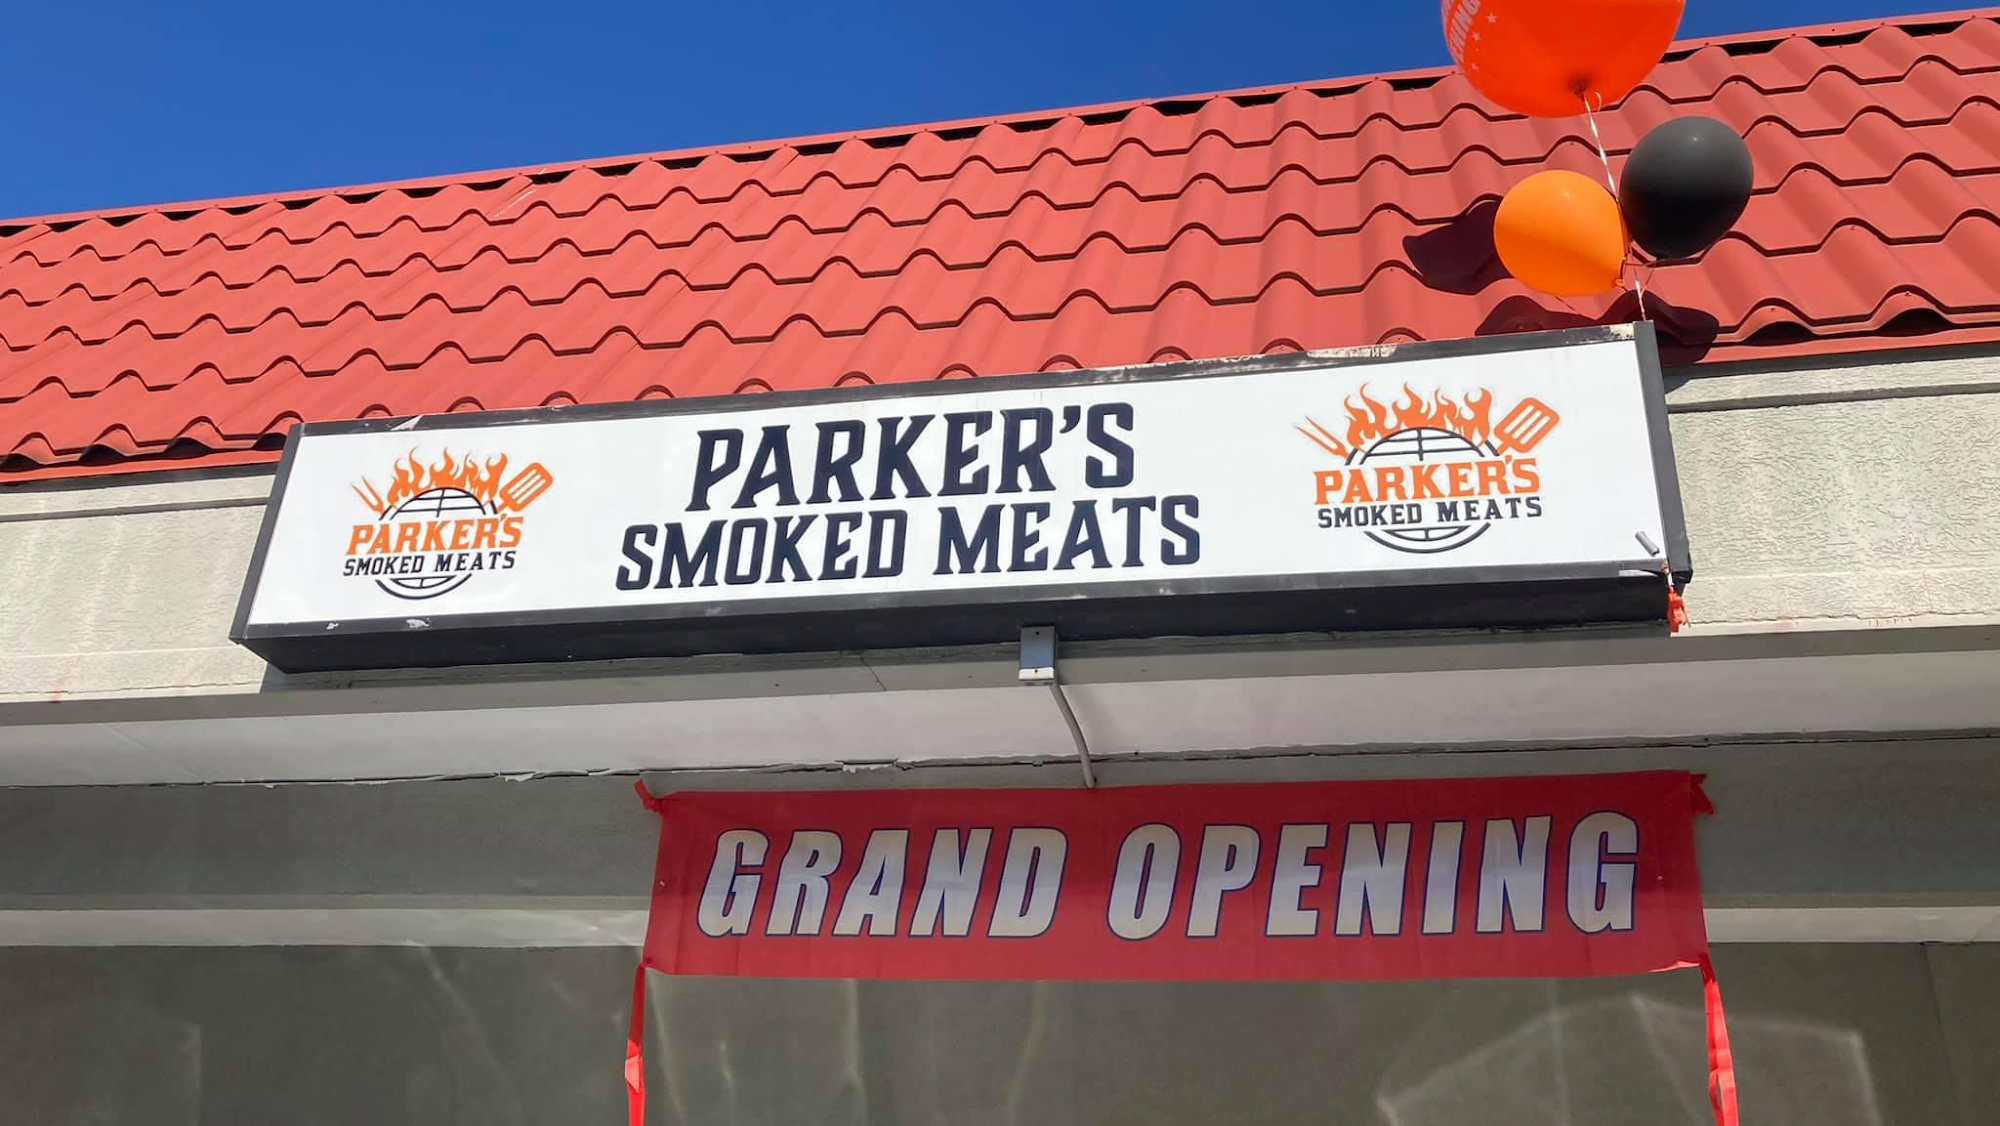 Parker's Smoked Meats